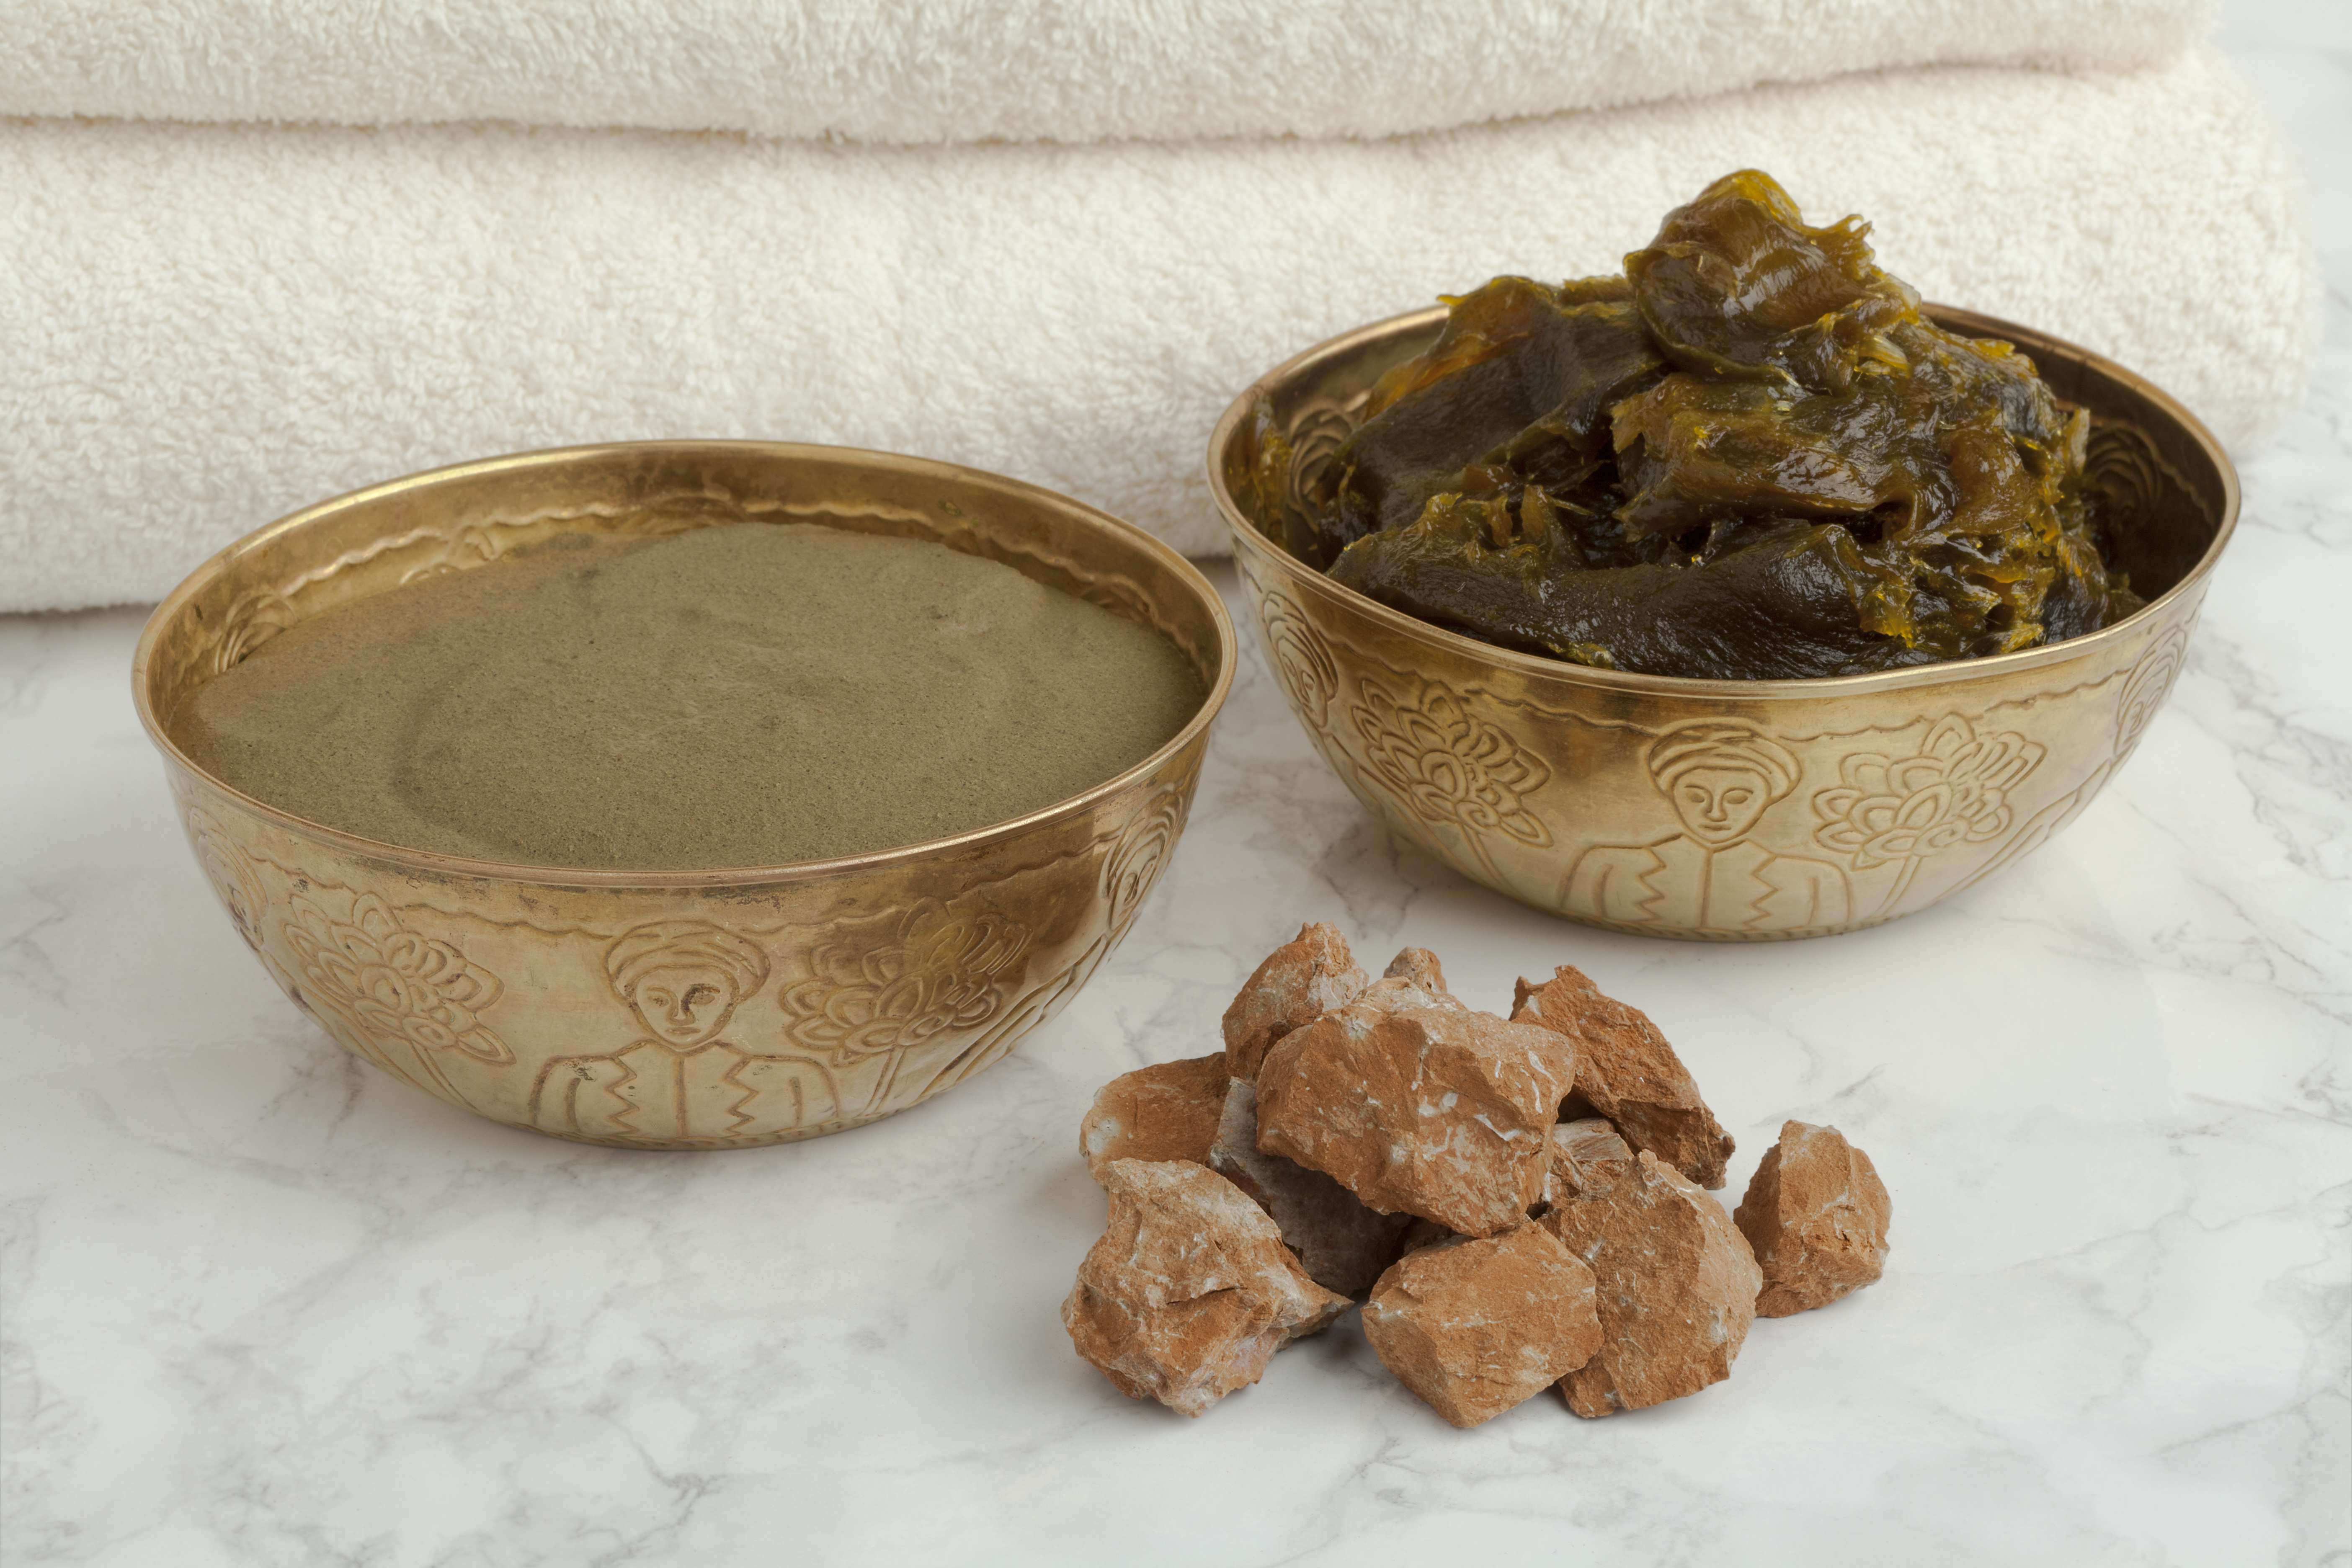 Hammam soaps, stones, and scrubs in antique brass bowls – © Picture Partners / Shutterstock